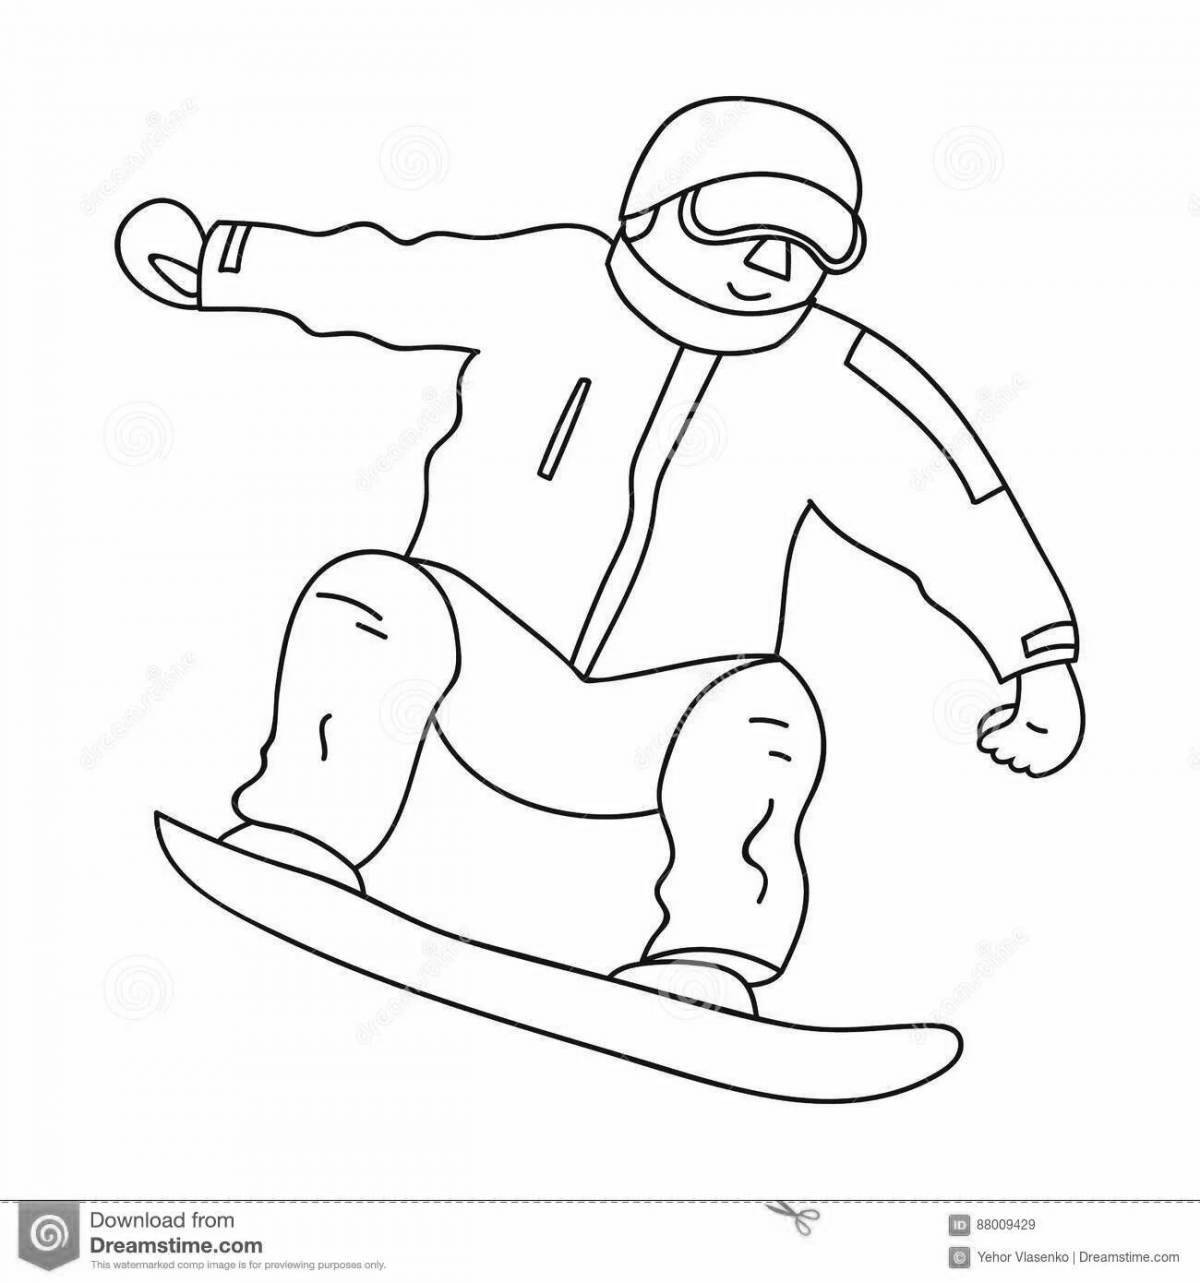 Color-brilliant snowboard coloring page for kids